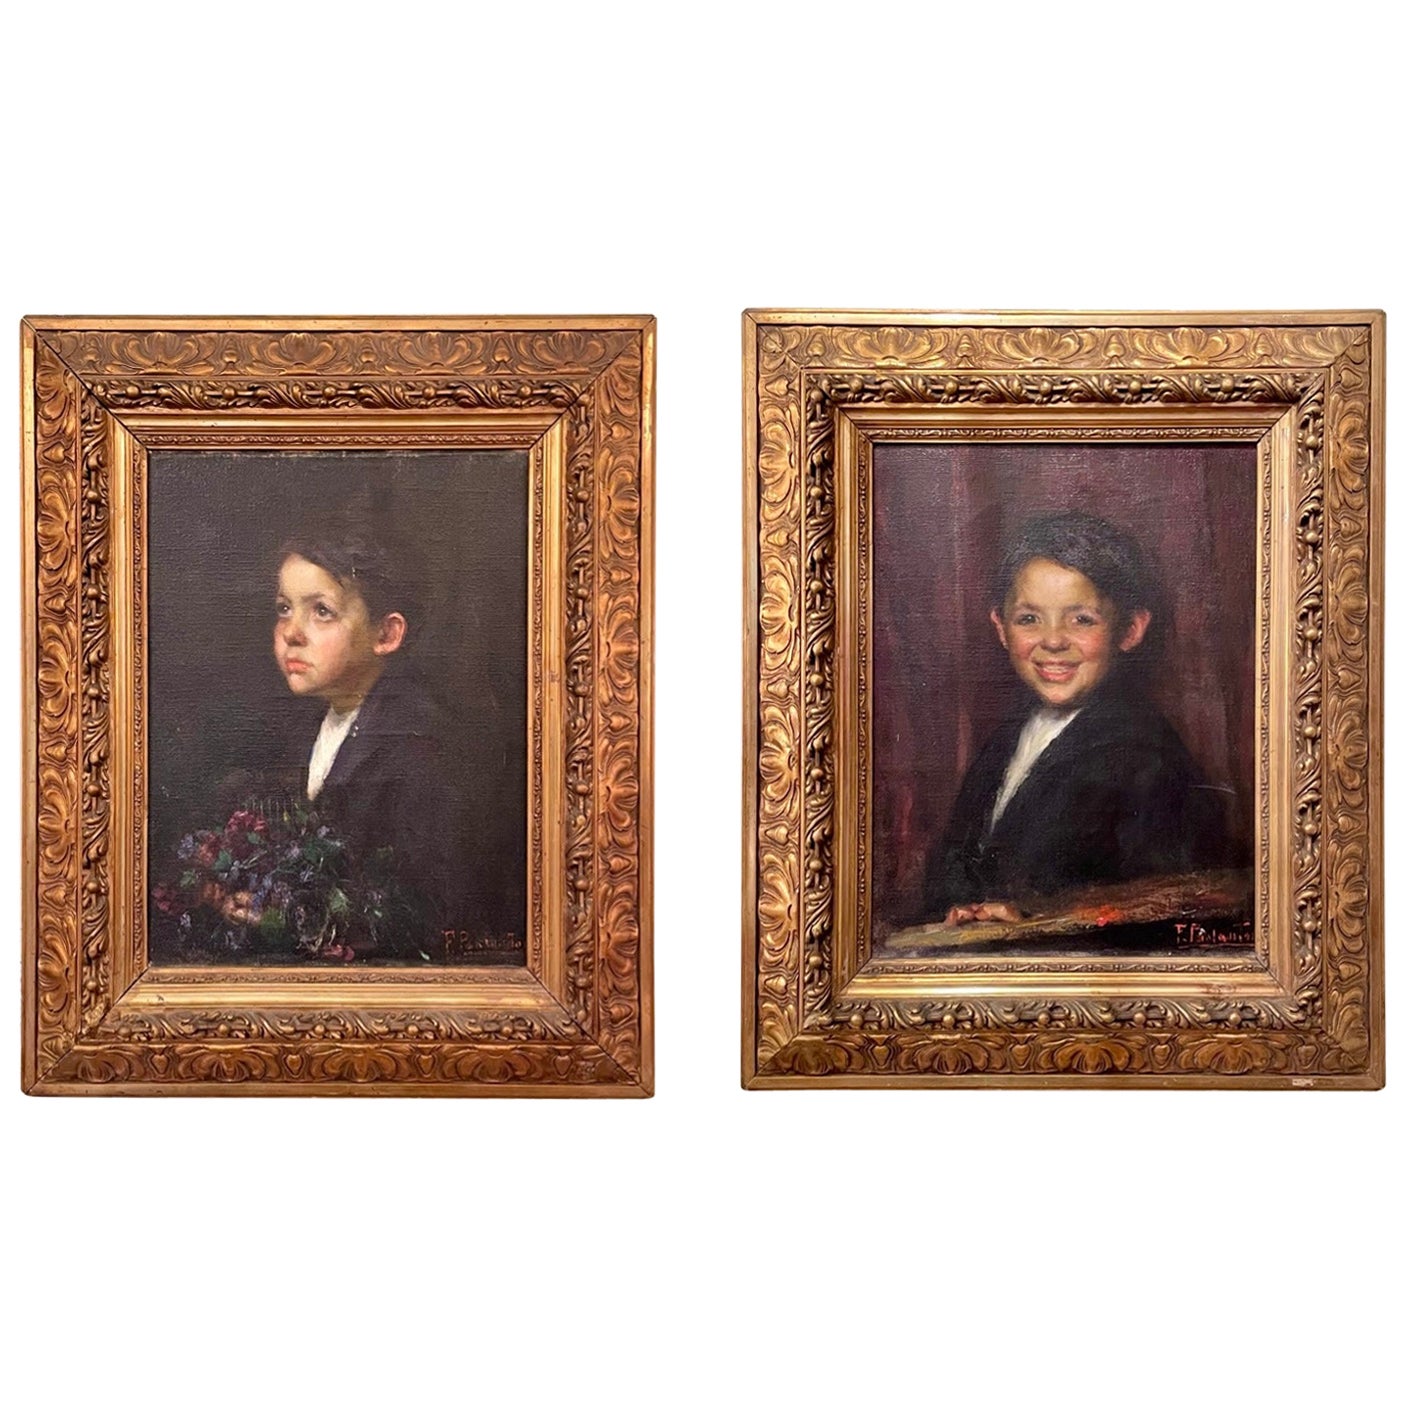 Pair Antique Framed Oil on Canvas Portrait Paintings, Circa 1900.